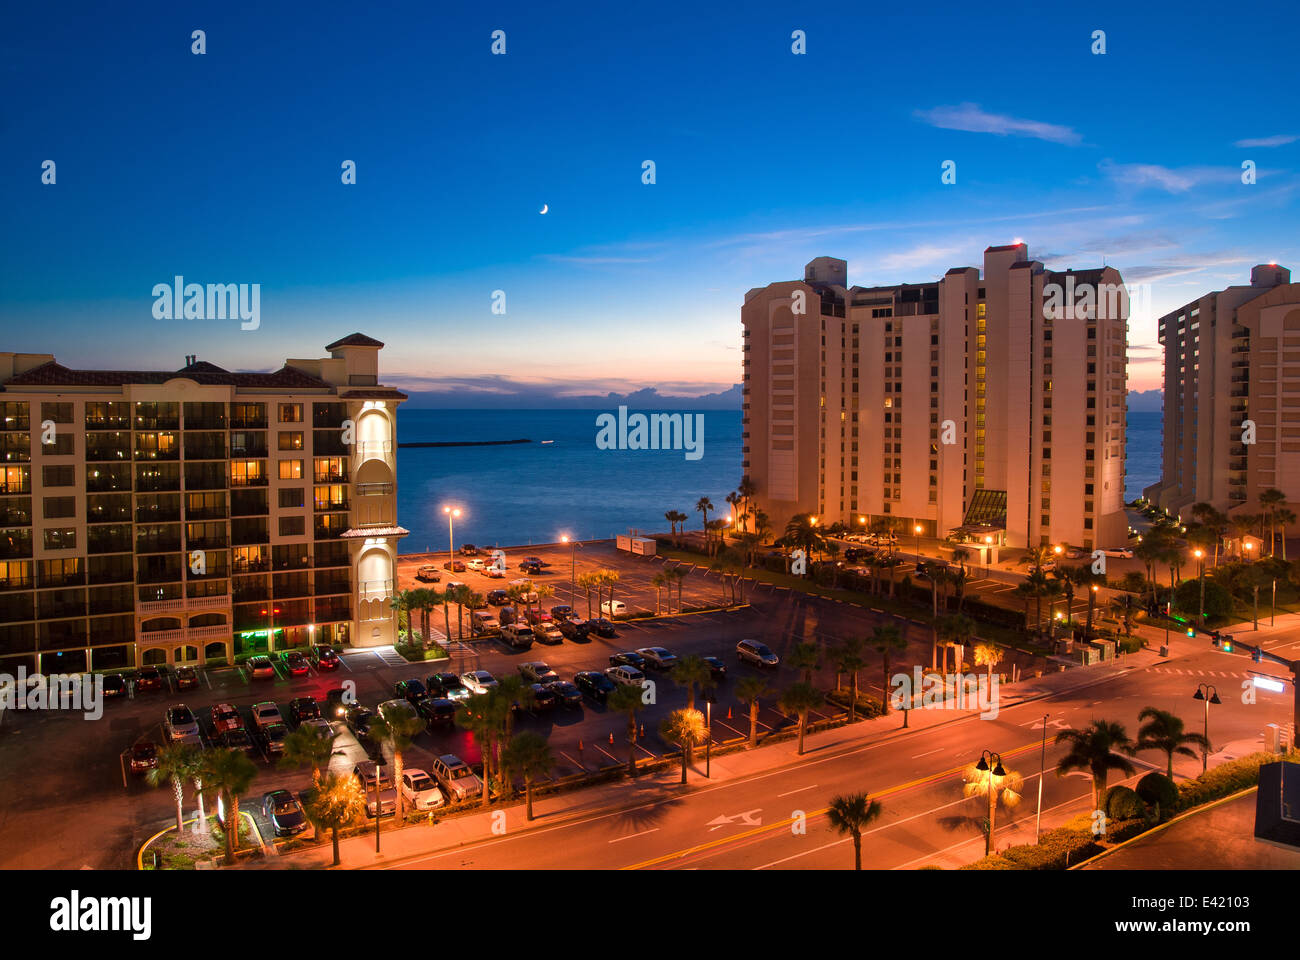 sunset of clearwater at tampa florida Stock Photo